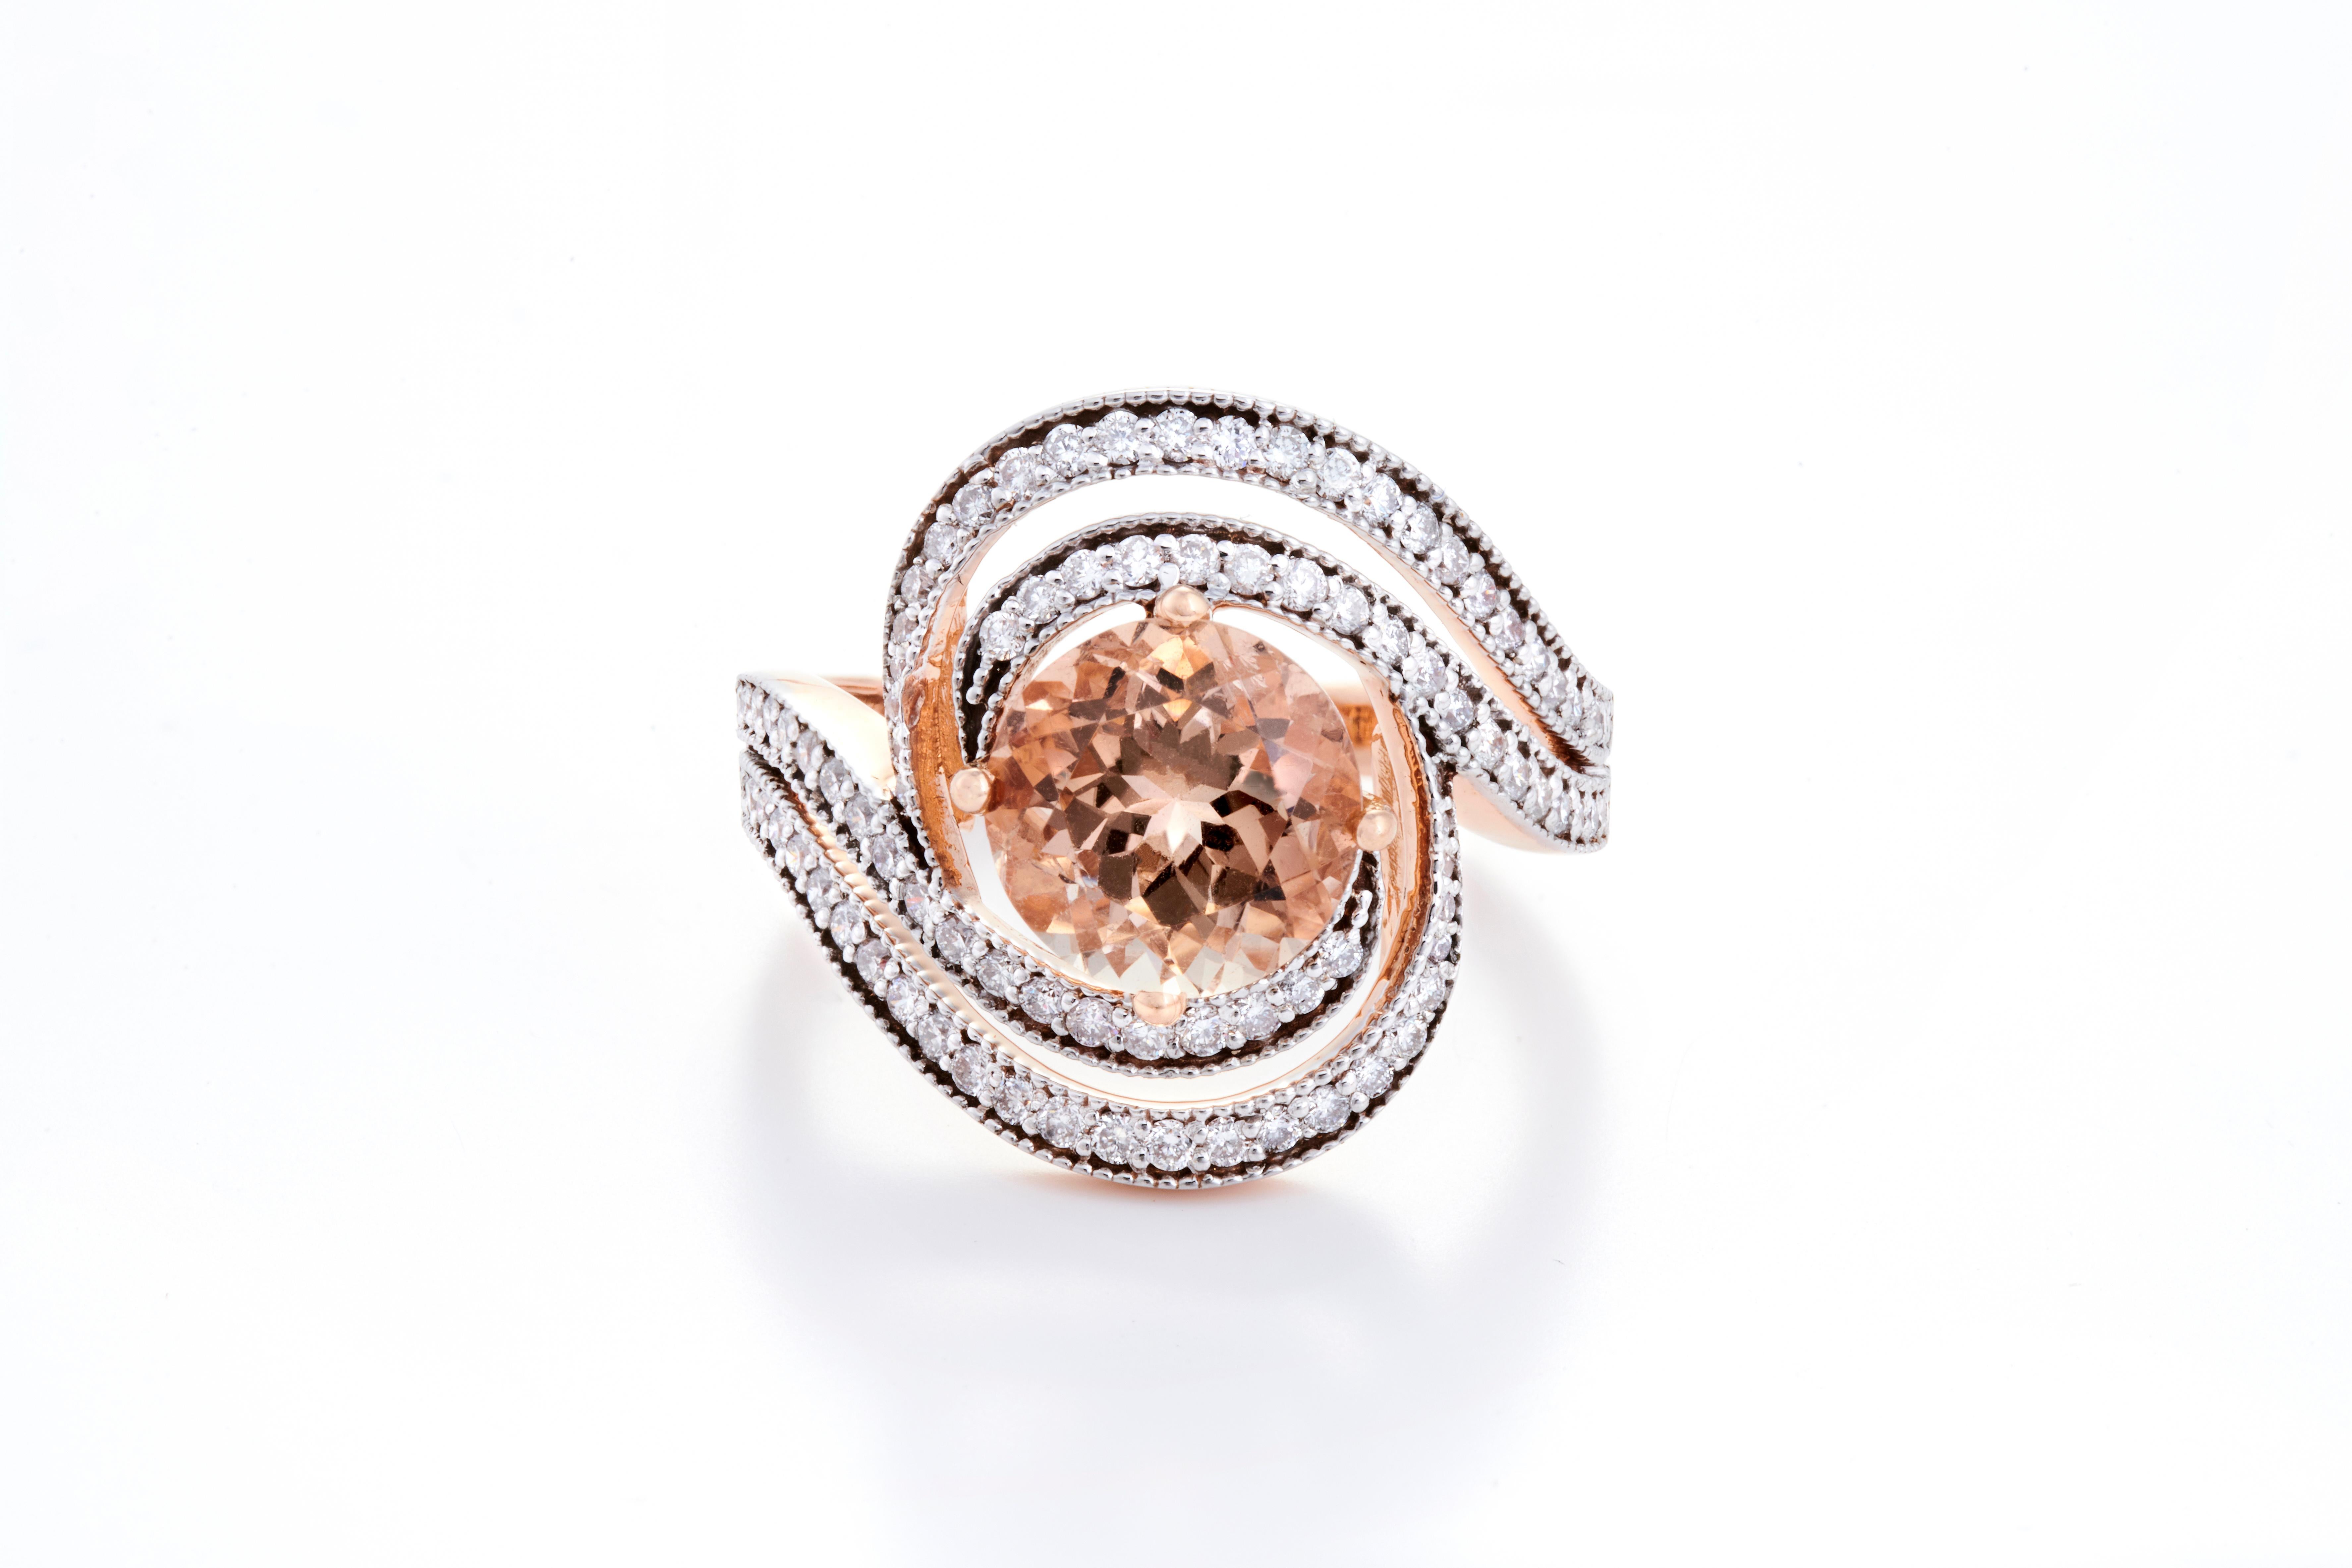 Set in 5.83 grams of 18K Rose Gold with 90 round cut diamonds around the Gemstone VS/G quality and colour weighing 0.57 carats. 

These diamonds and gemstones have been carefully picked and selected from authentic sources and complete importance has